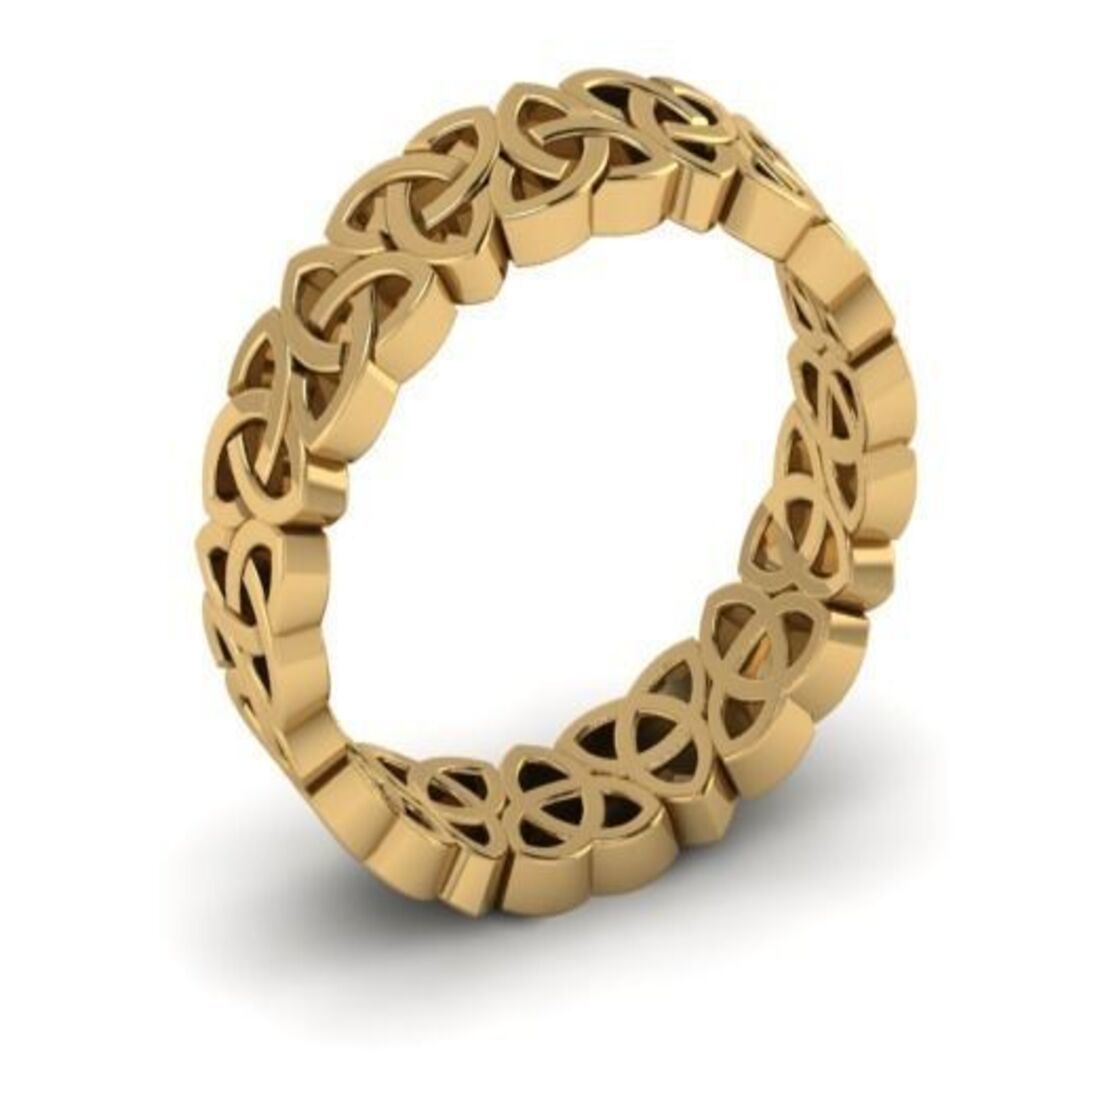 jewelry Ring model 3D print model preview image.